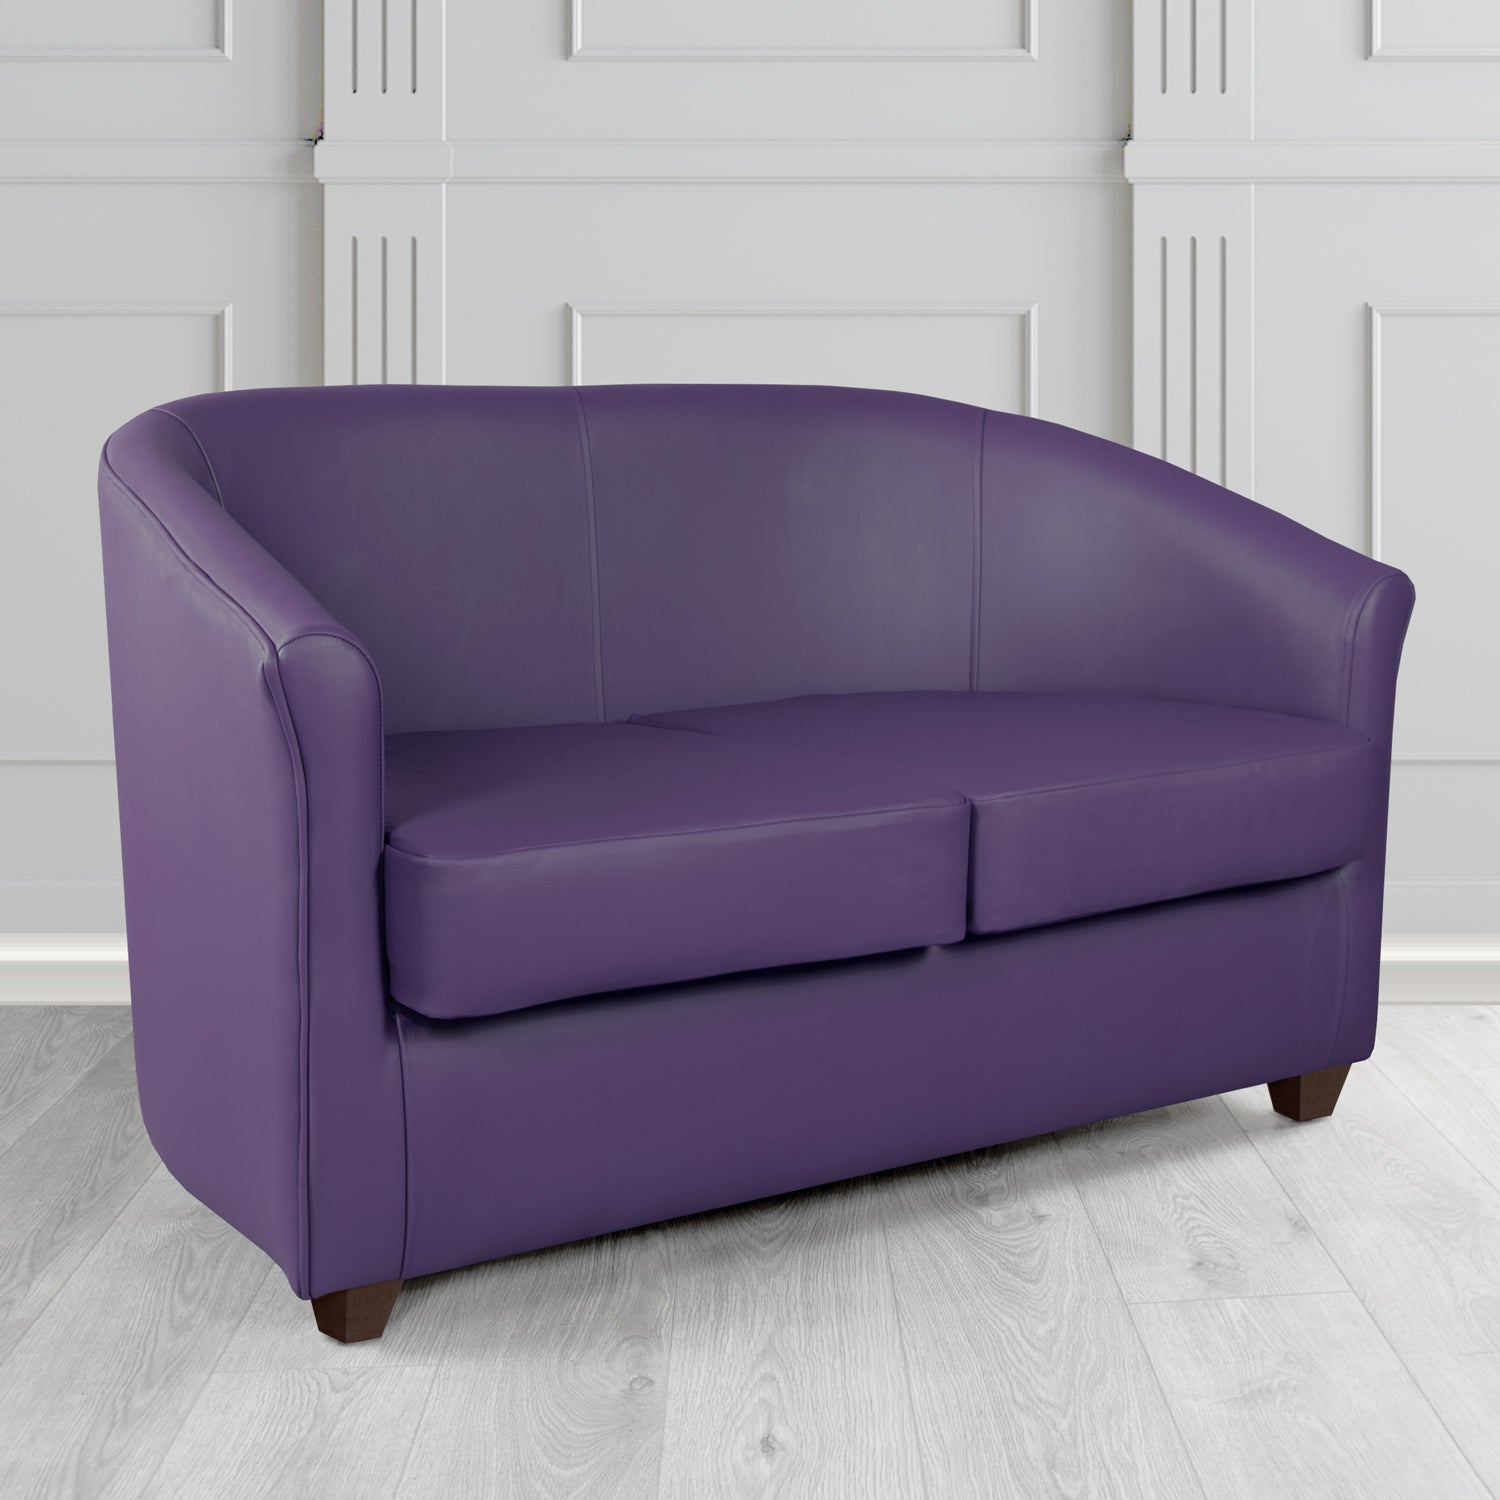 Cannes 2 Seater Tub Sofa in Just Colour Blackberry Crib 5 Faux Leather - The Tub Chair Shop